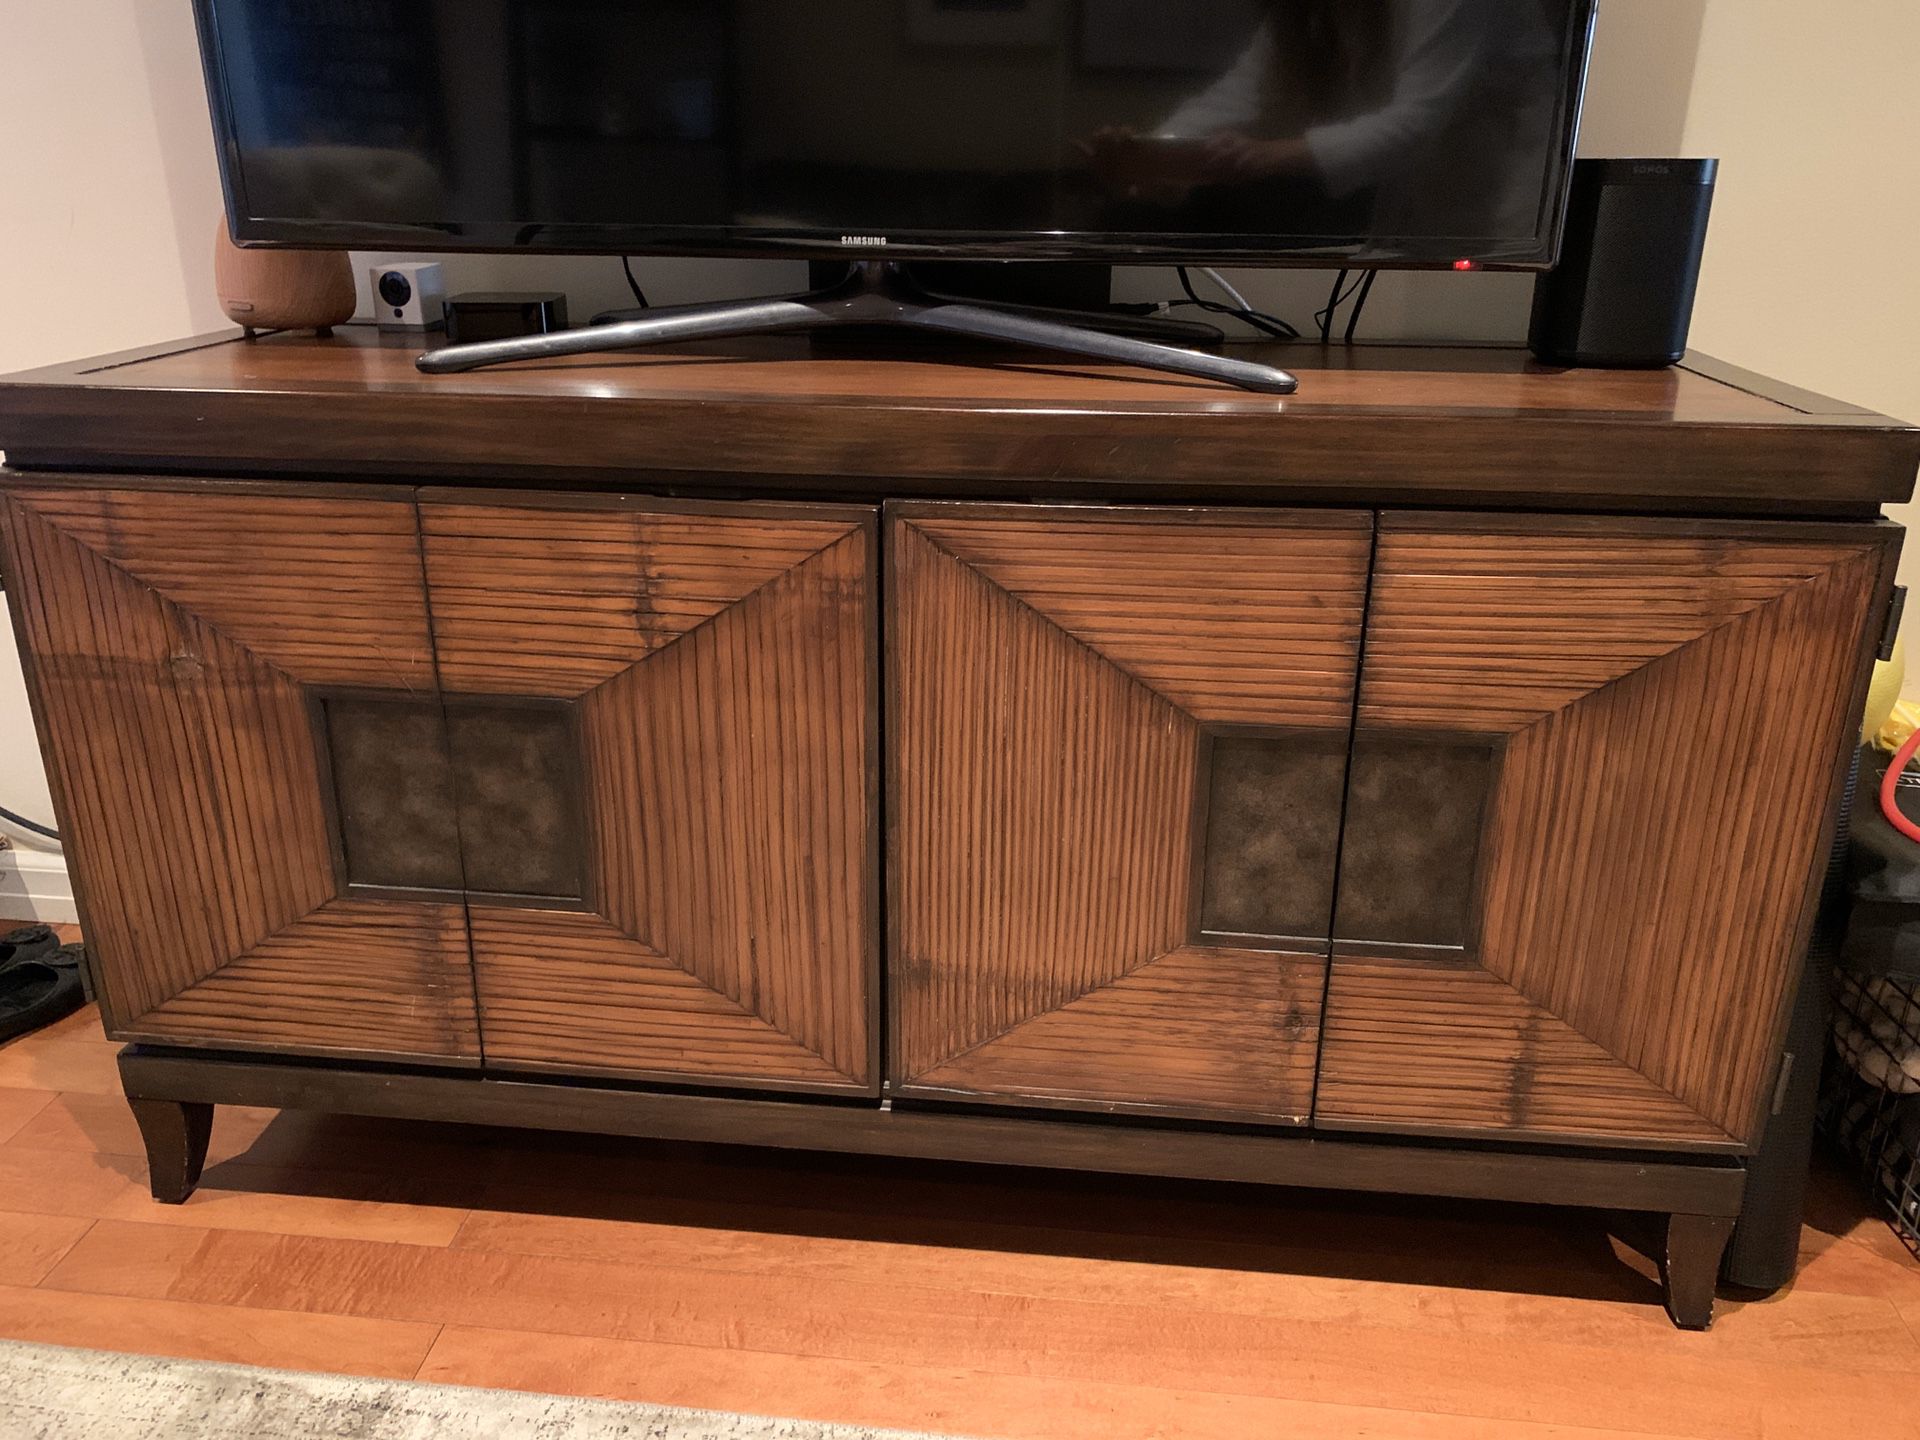 Media console / TV stand